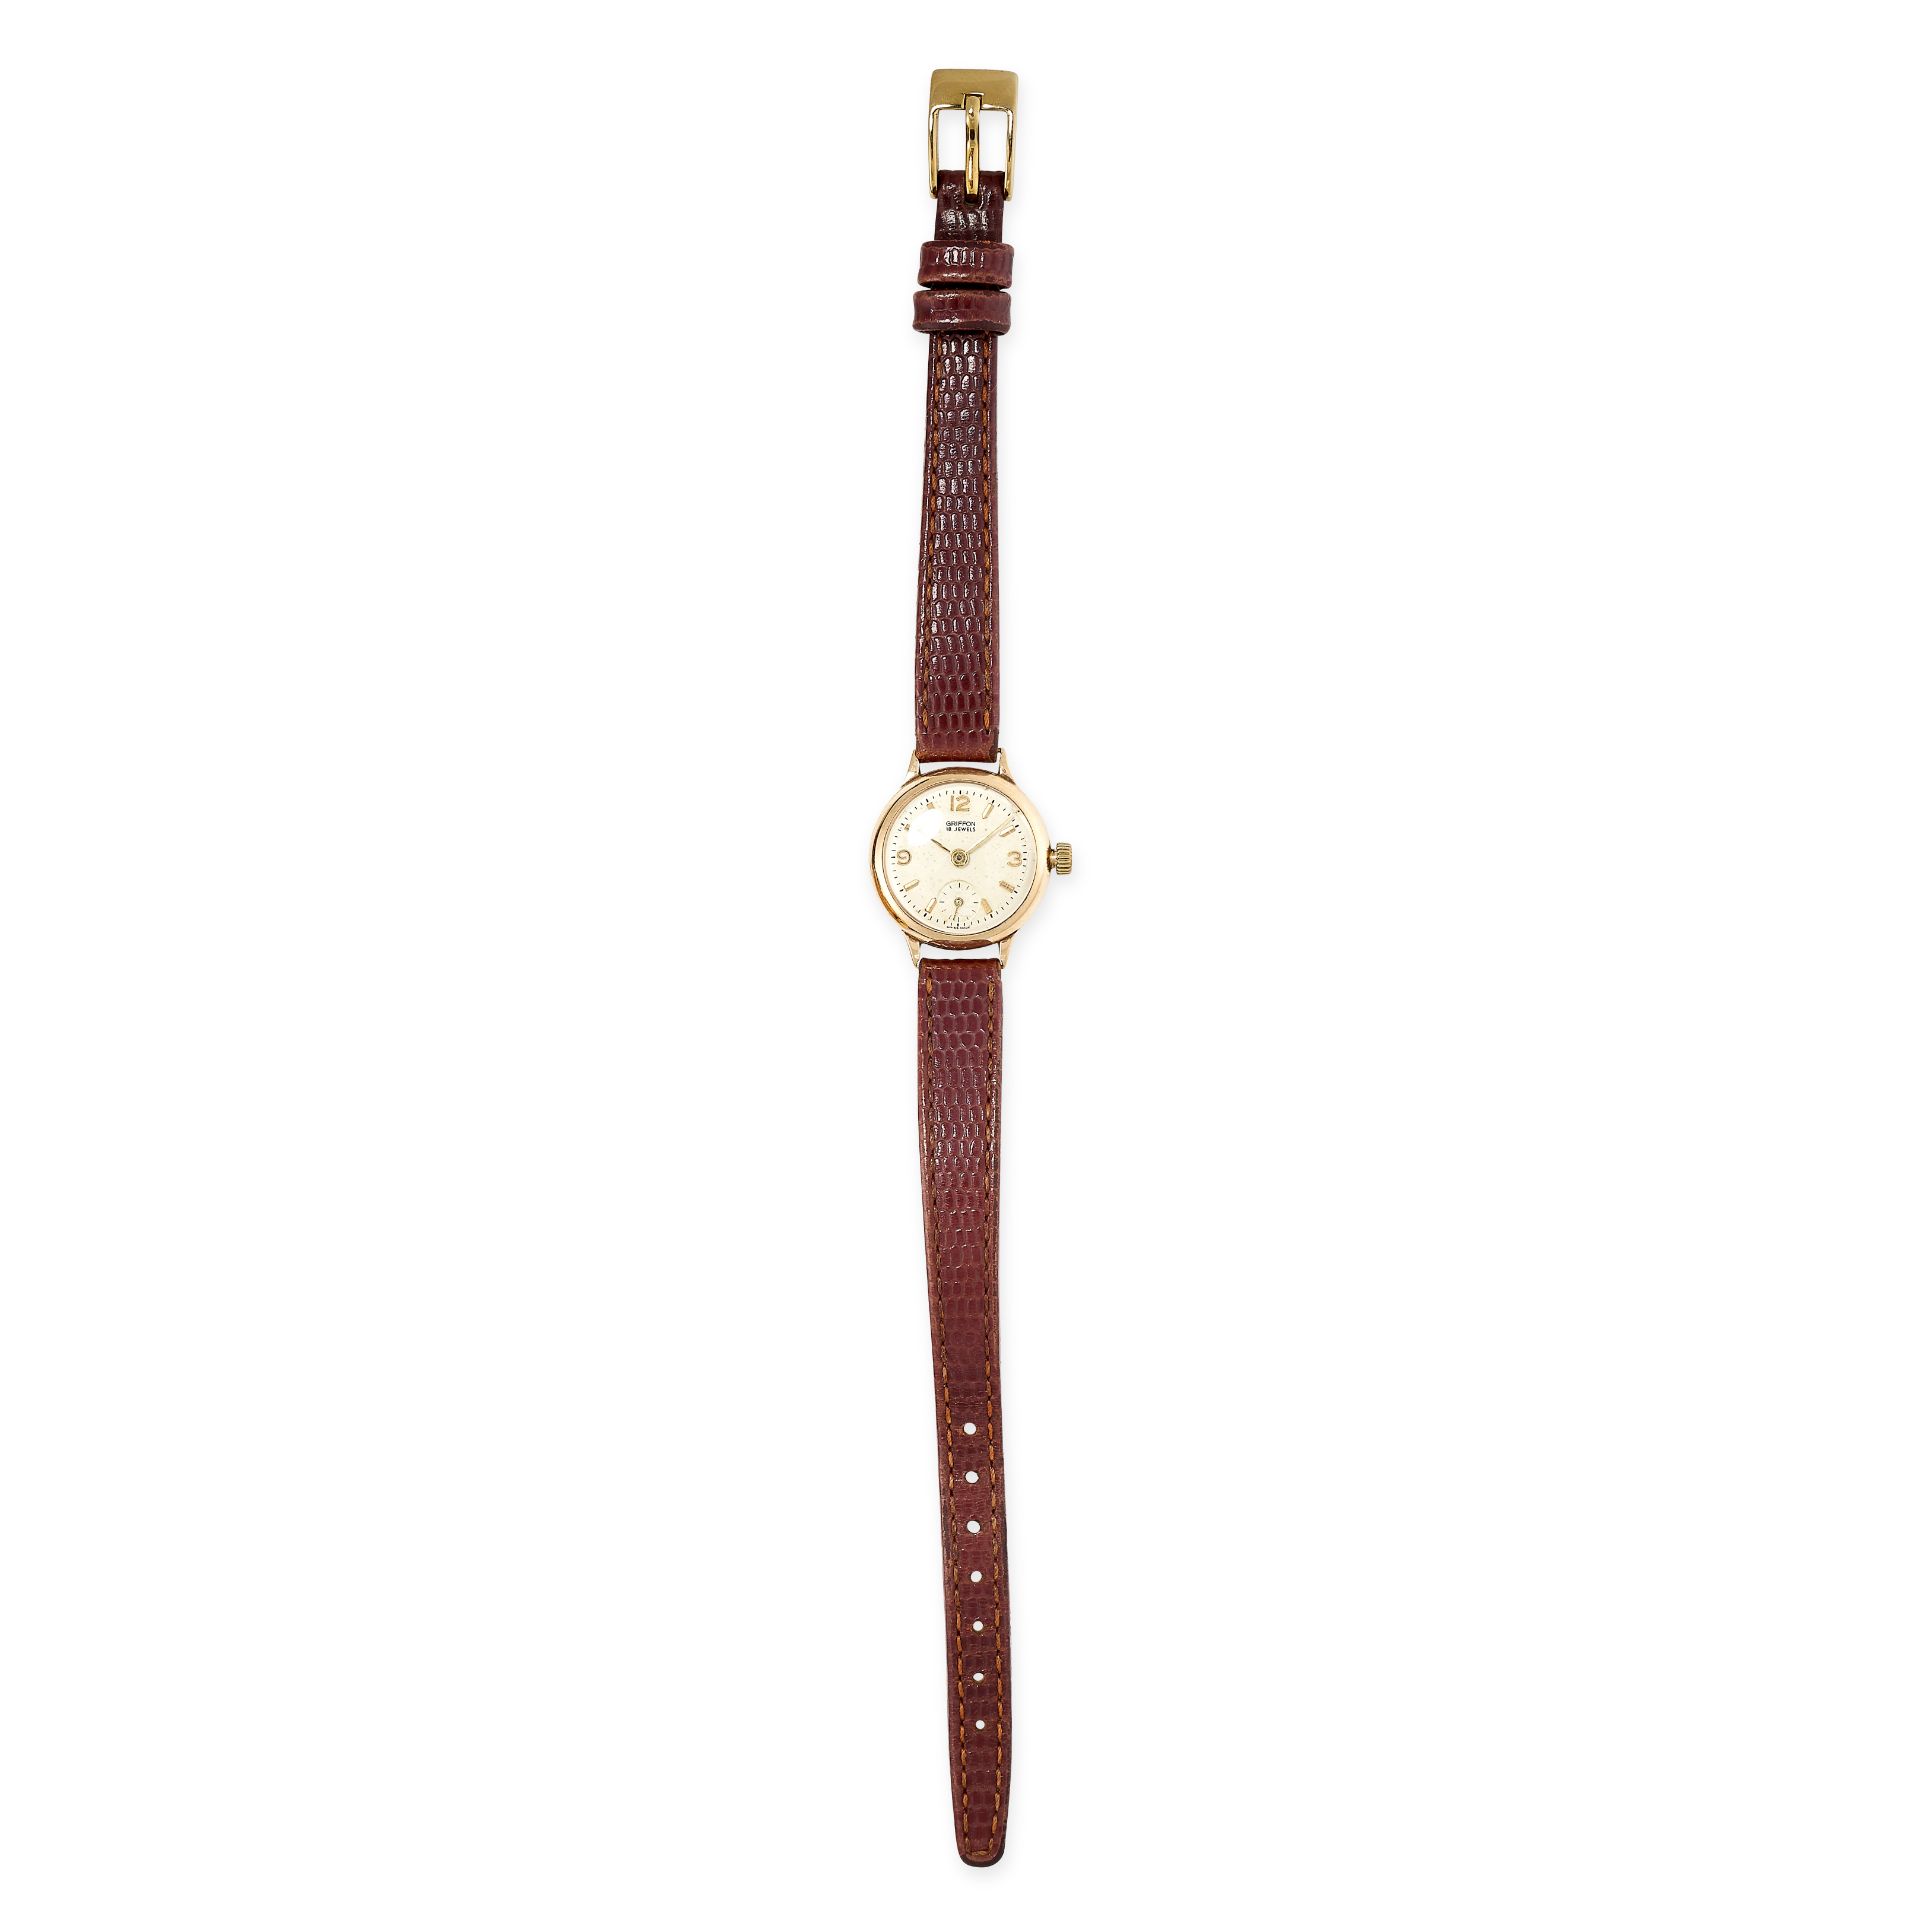 A VINTAGE LADIES WRIST WATCH the circular cream dial with Roman numerals, with brown leather